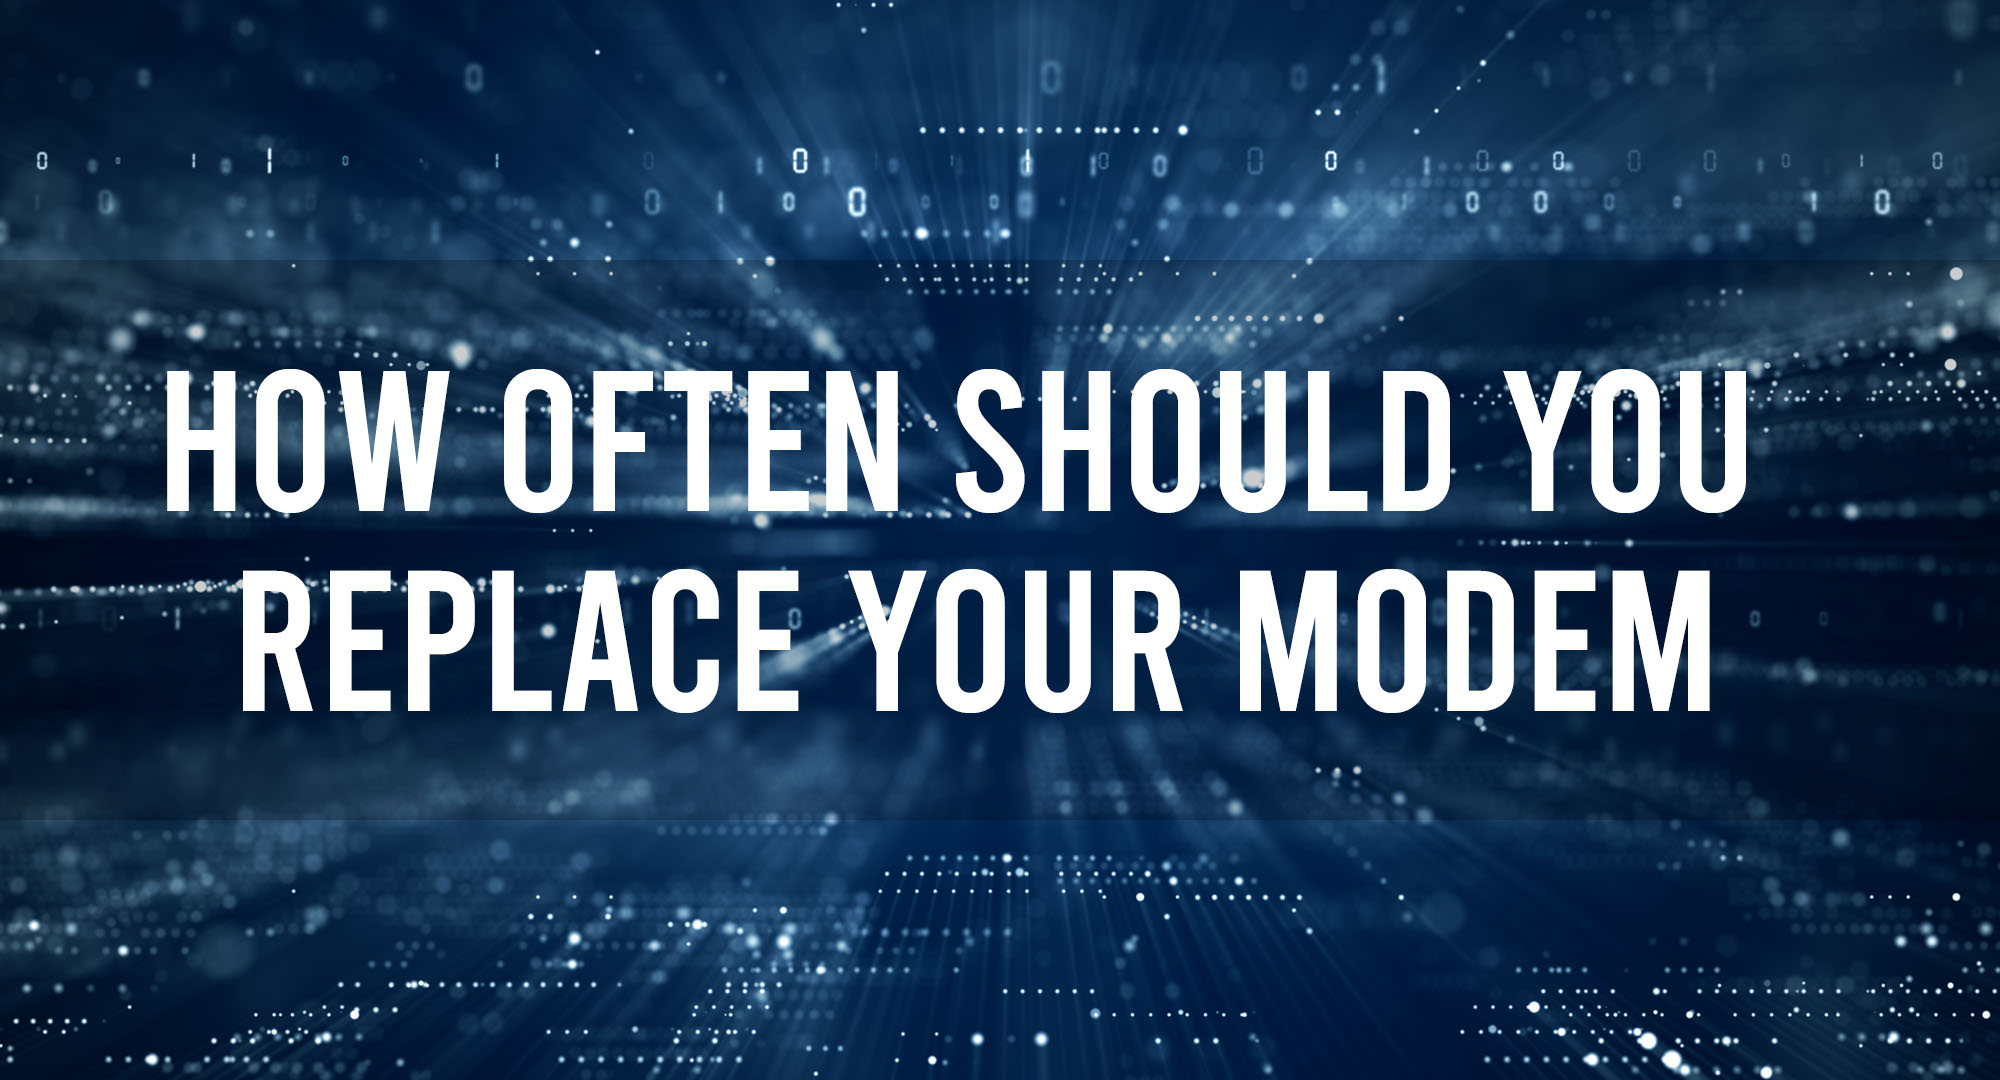 How often should you replace your modem